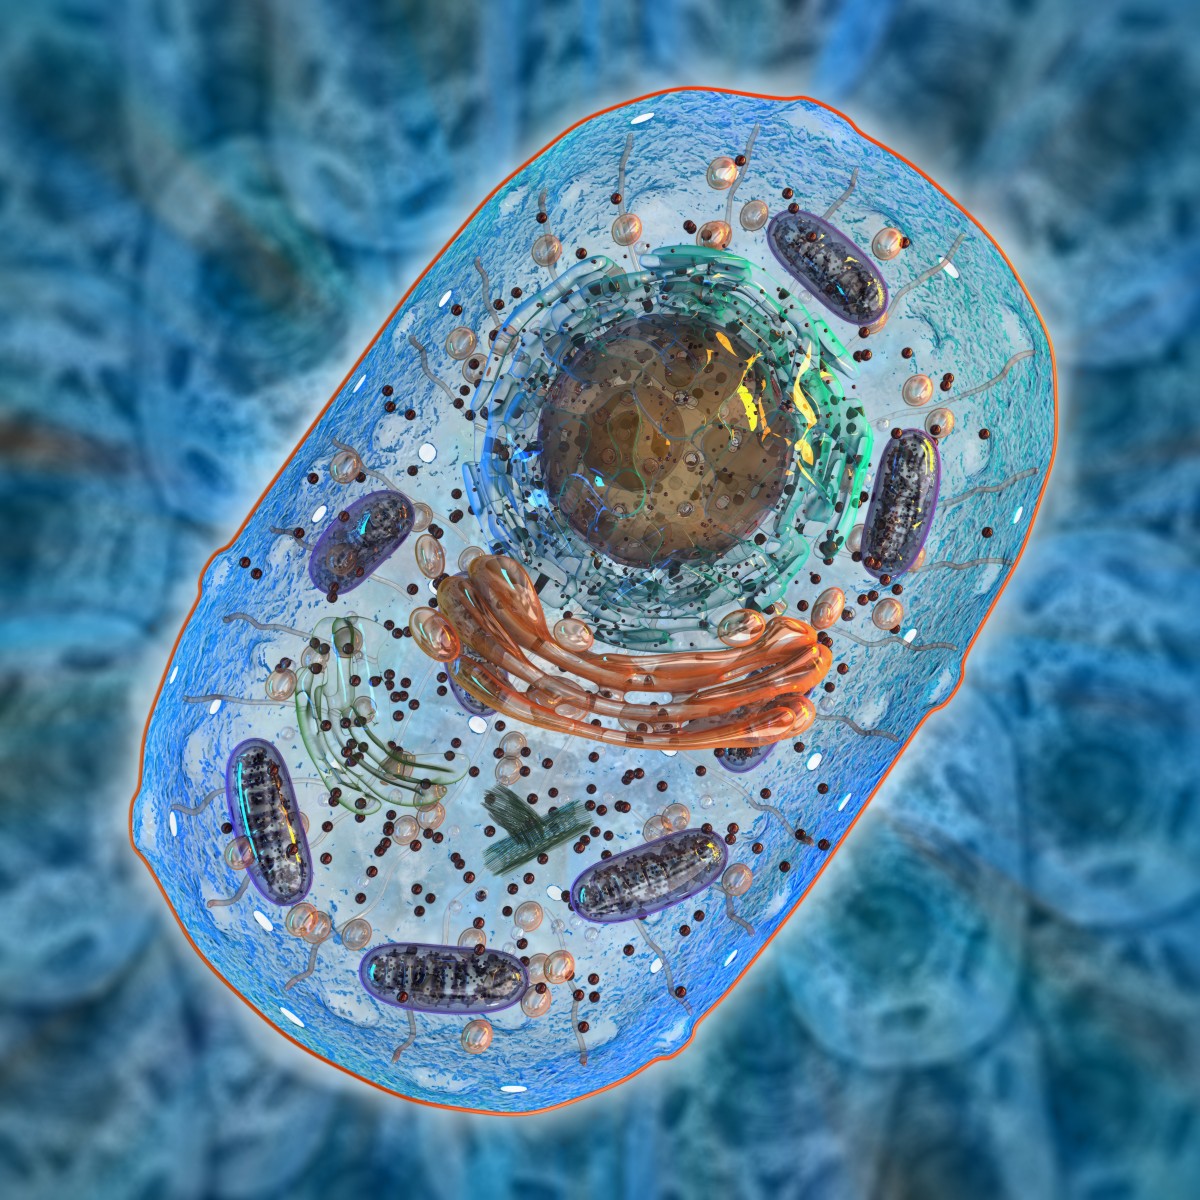 Mitochondrial replacement therapy